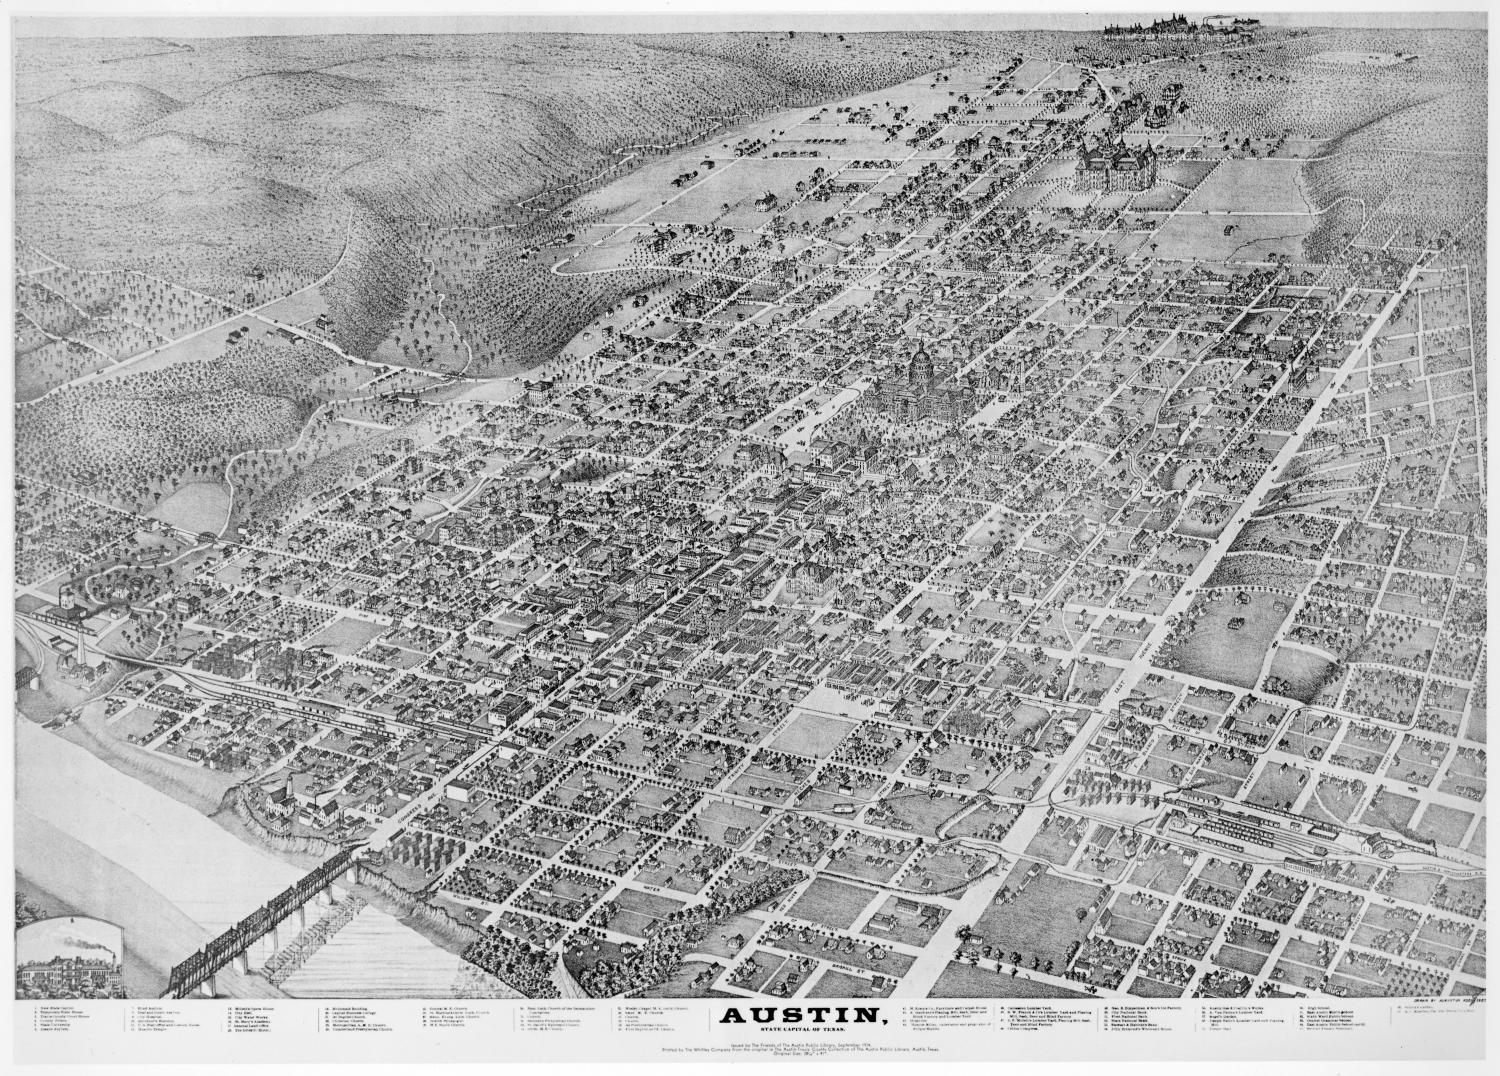 A birds-eye view illustration of Downtown Austin and surrounding areas in 1873.